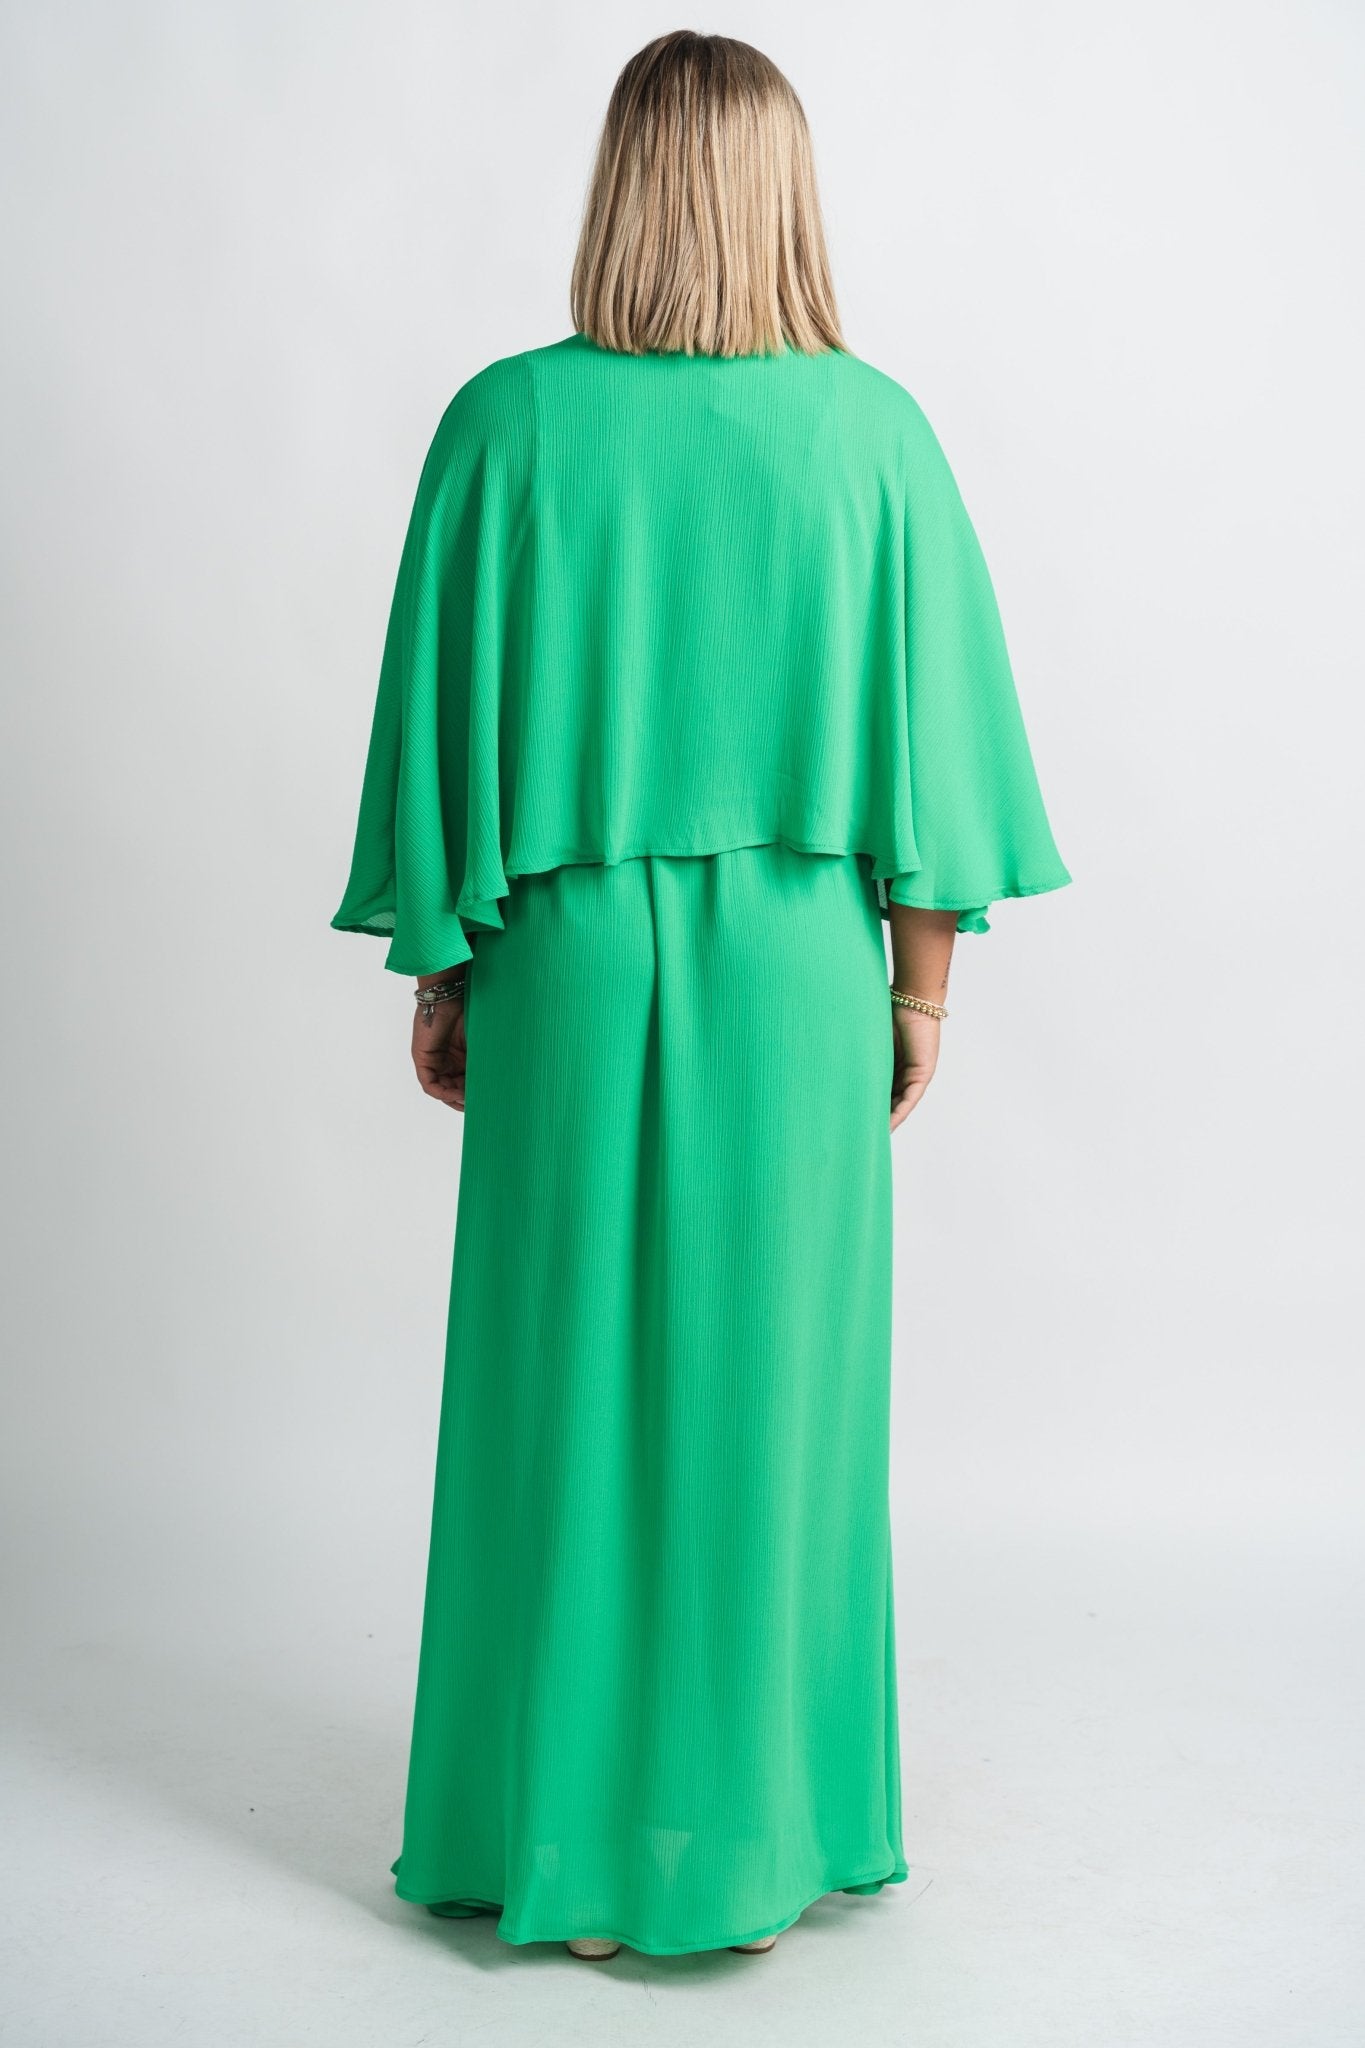 Crinkle cape maxi dress emerald - Affordable dress - Boutique Dresses at Lush Fashion Lounge Boutique in Oklahoma City